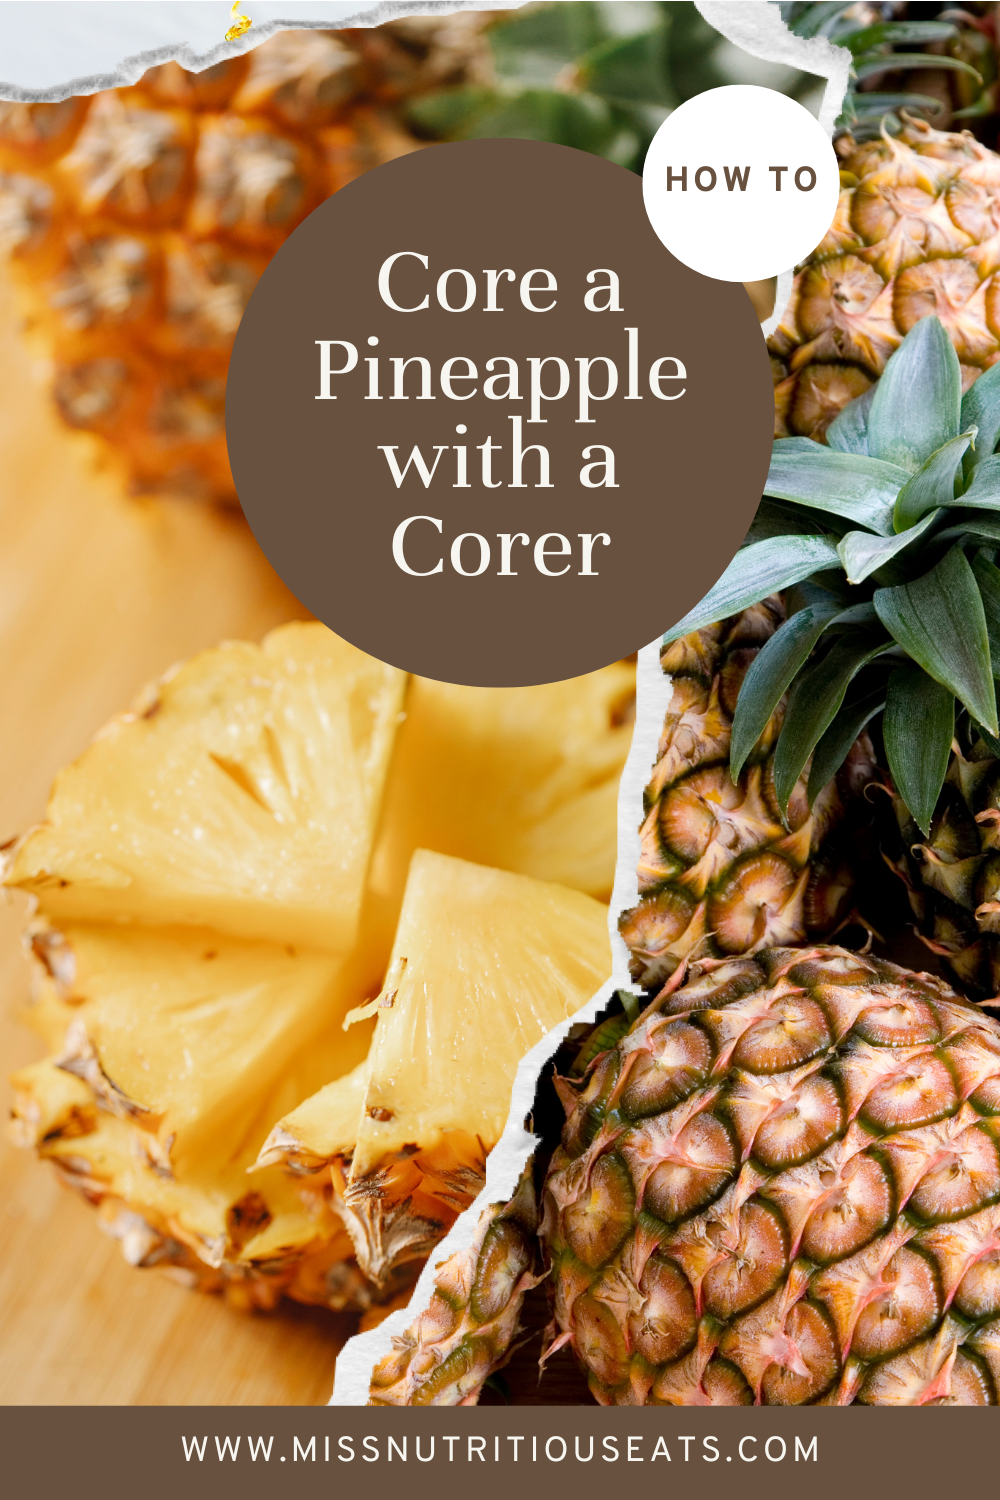 How to cut a whole pineapple with a corer